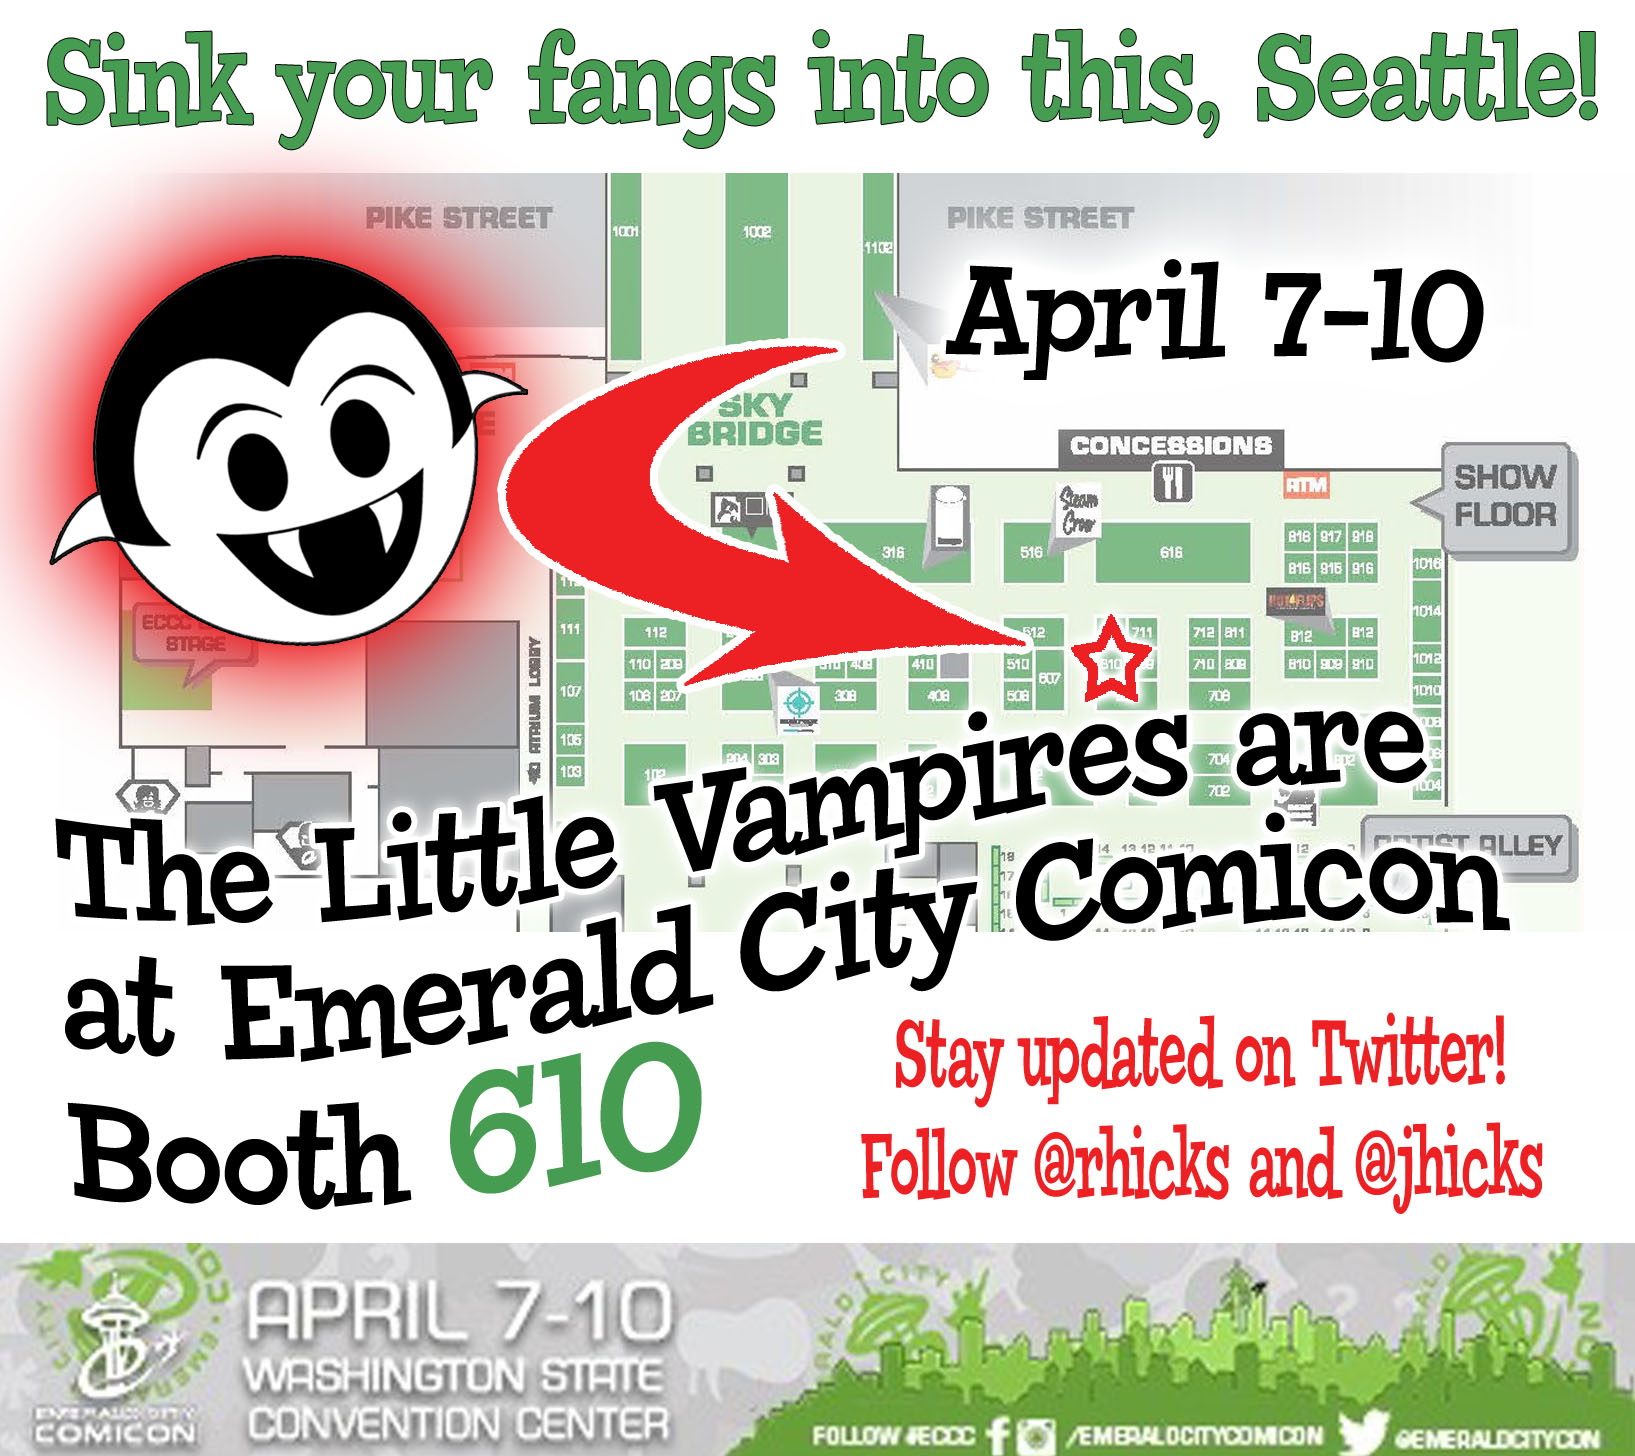 Emerald City Comicon 2016 exhibitor floor map with the Little Vampires booth highlighted